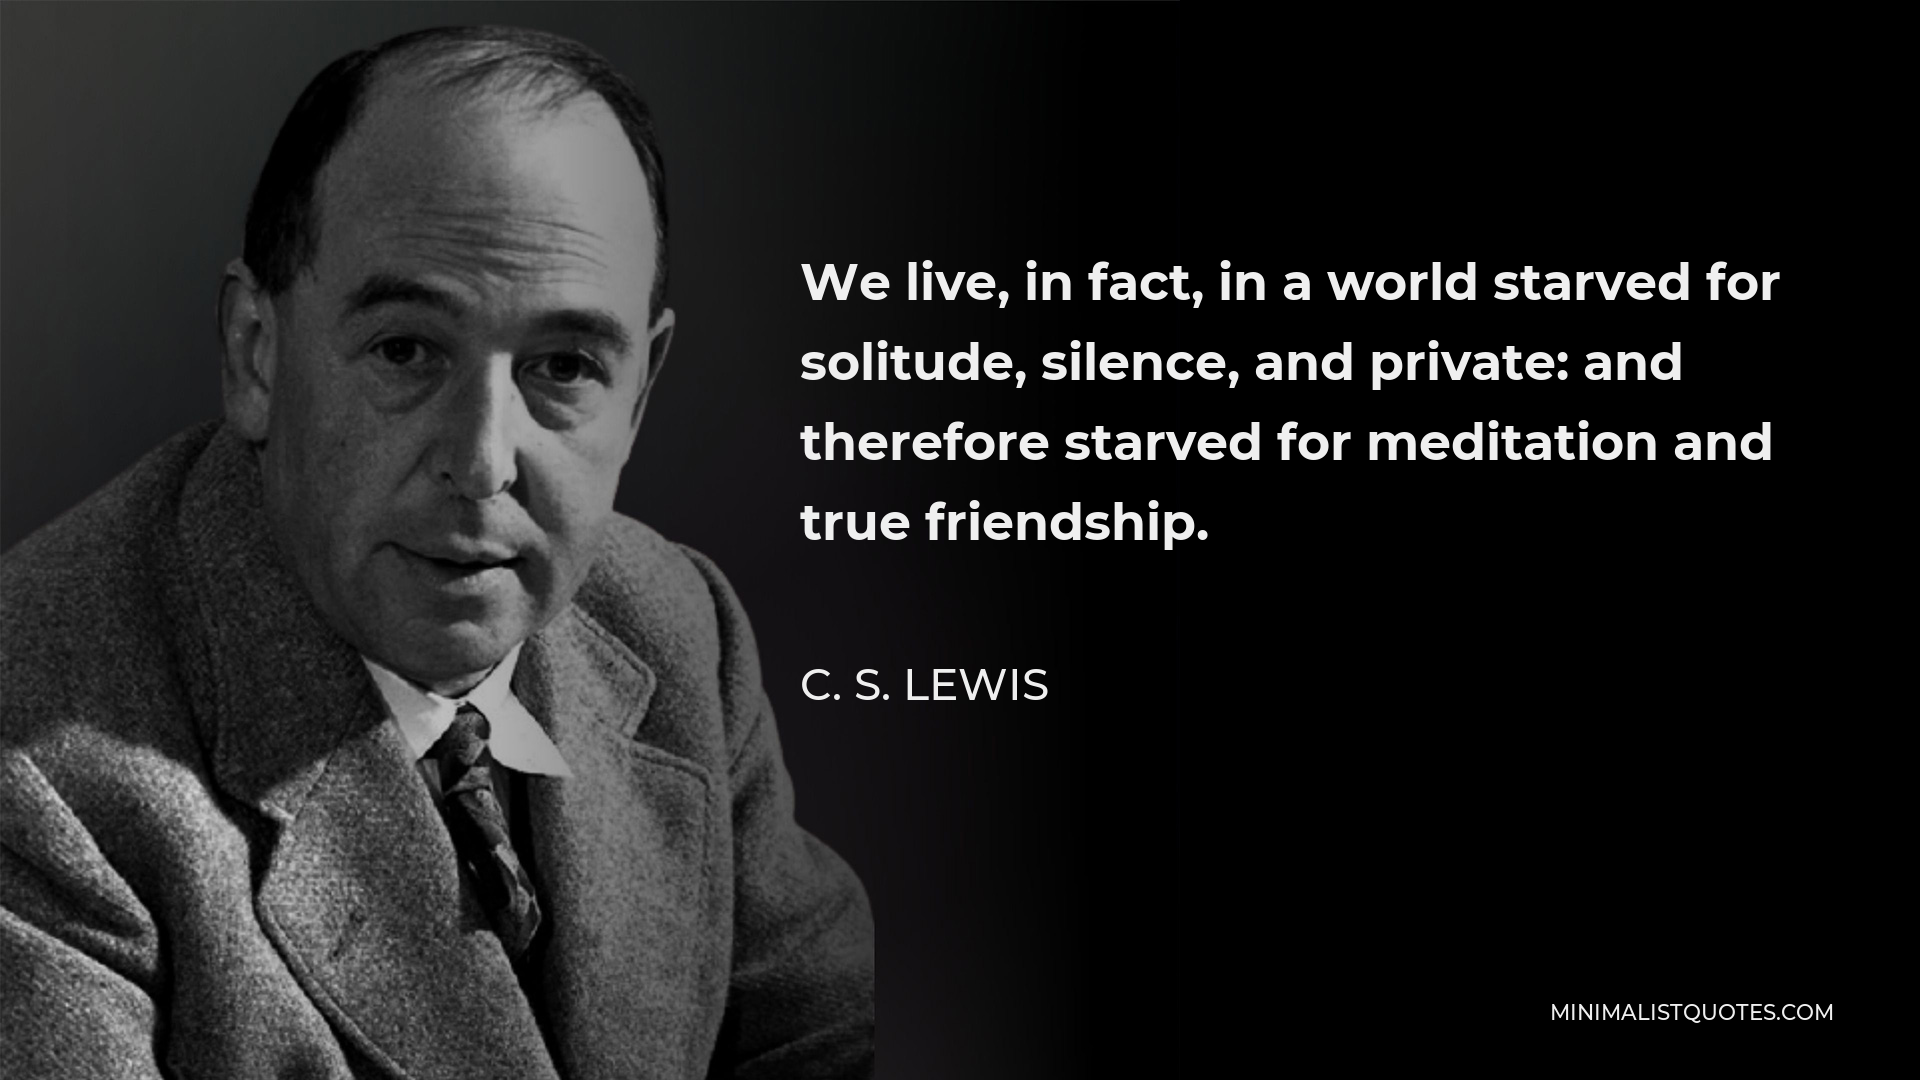 C. S. Lewis Quote - We live, in fact, in a world starved for solitude, silence, and private: and therefore starved for meditation and true friendship.